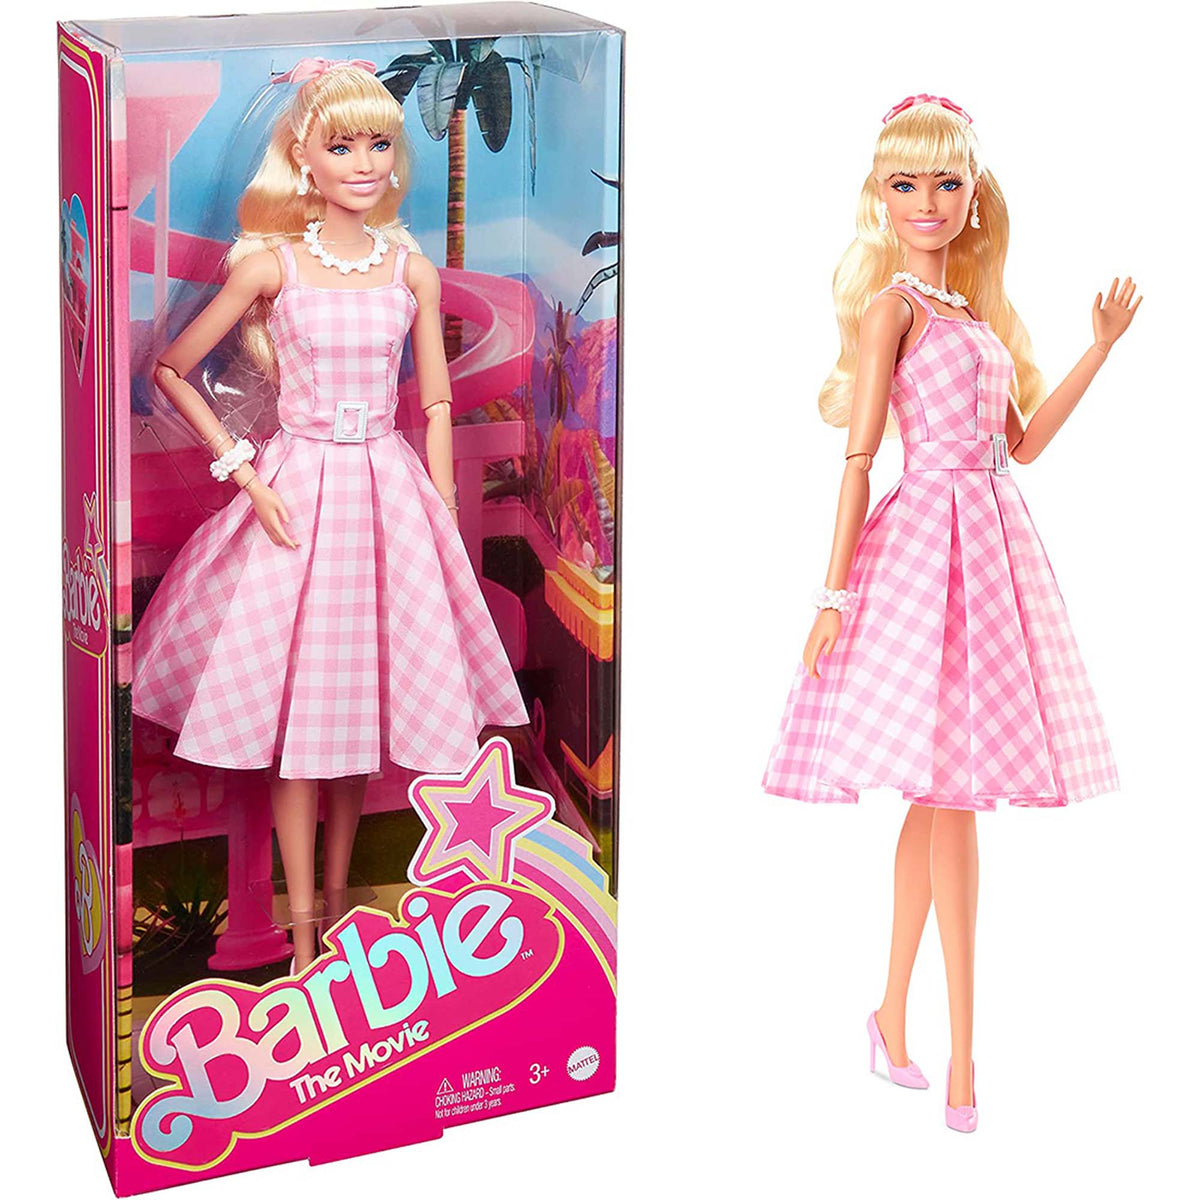 WILTON INDUSTRIES Cake Supplies Barbie The Movie Barbie Doll In Iconic Outfit, 1 Count